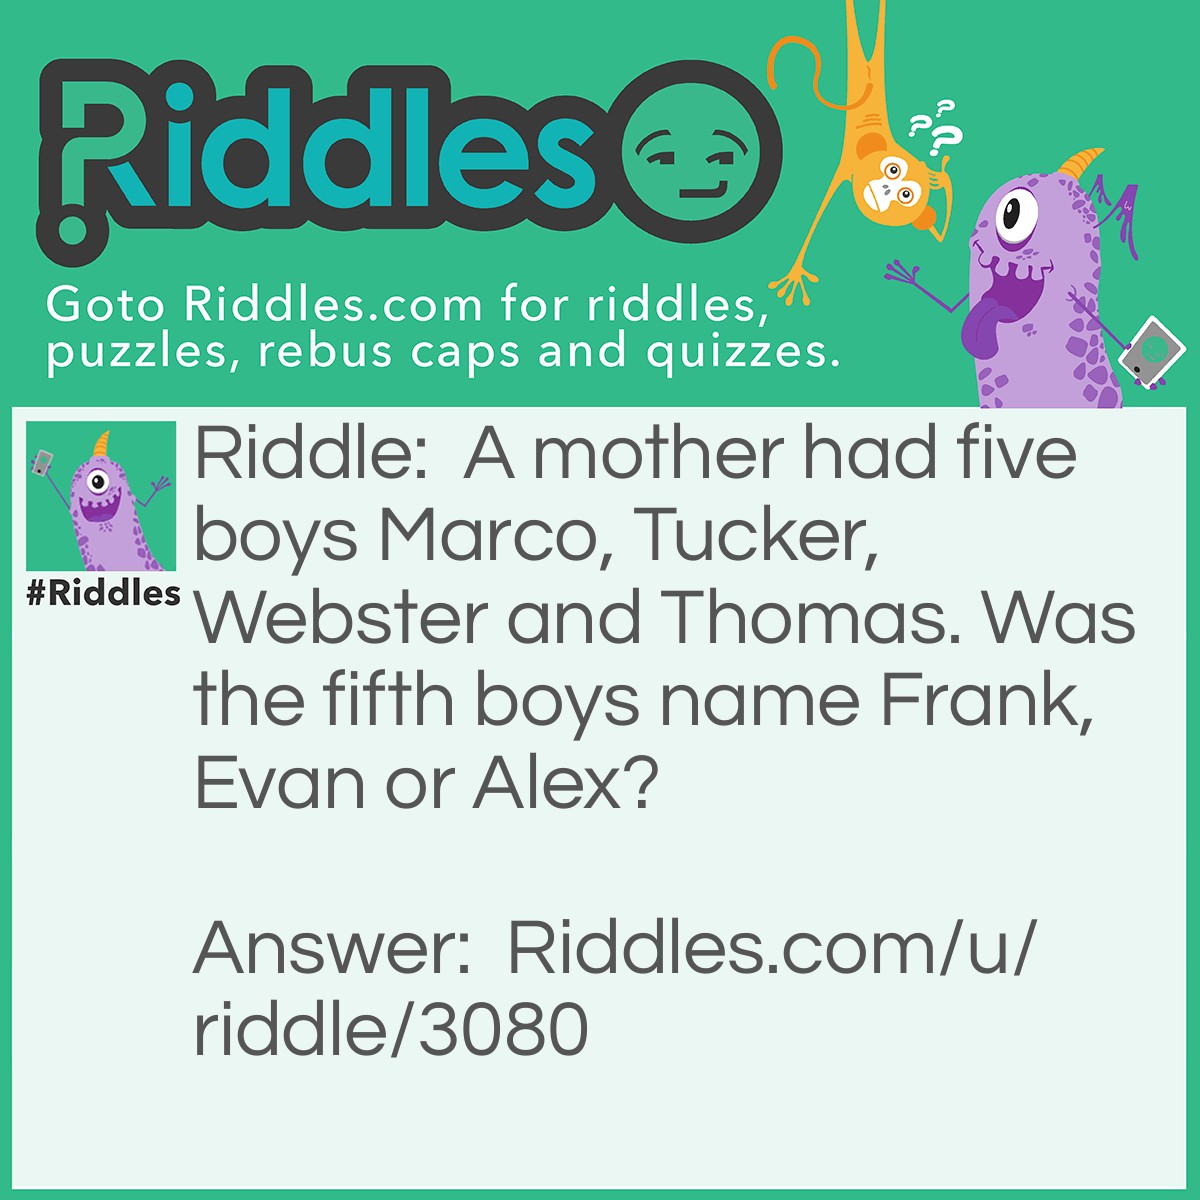 Riddle: A mother had five boys Marco, Tucker, Webster, and Thomas. Was the fifth boy named Frank, Evan, or Alex? Answer: The answer is Frank.  The mother named the kids with the first two letters of the days of the week.Monday is Marco, Tuesday is Tucker, Wednesday is Webster, Thursday is Thomas and Friday is Frank.